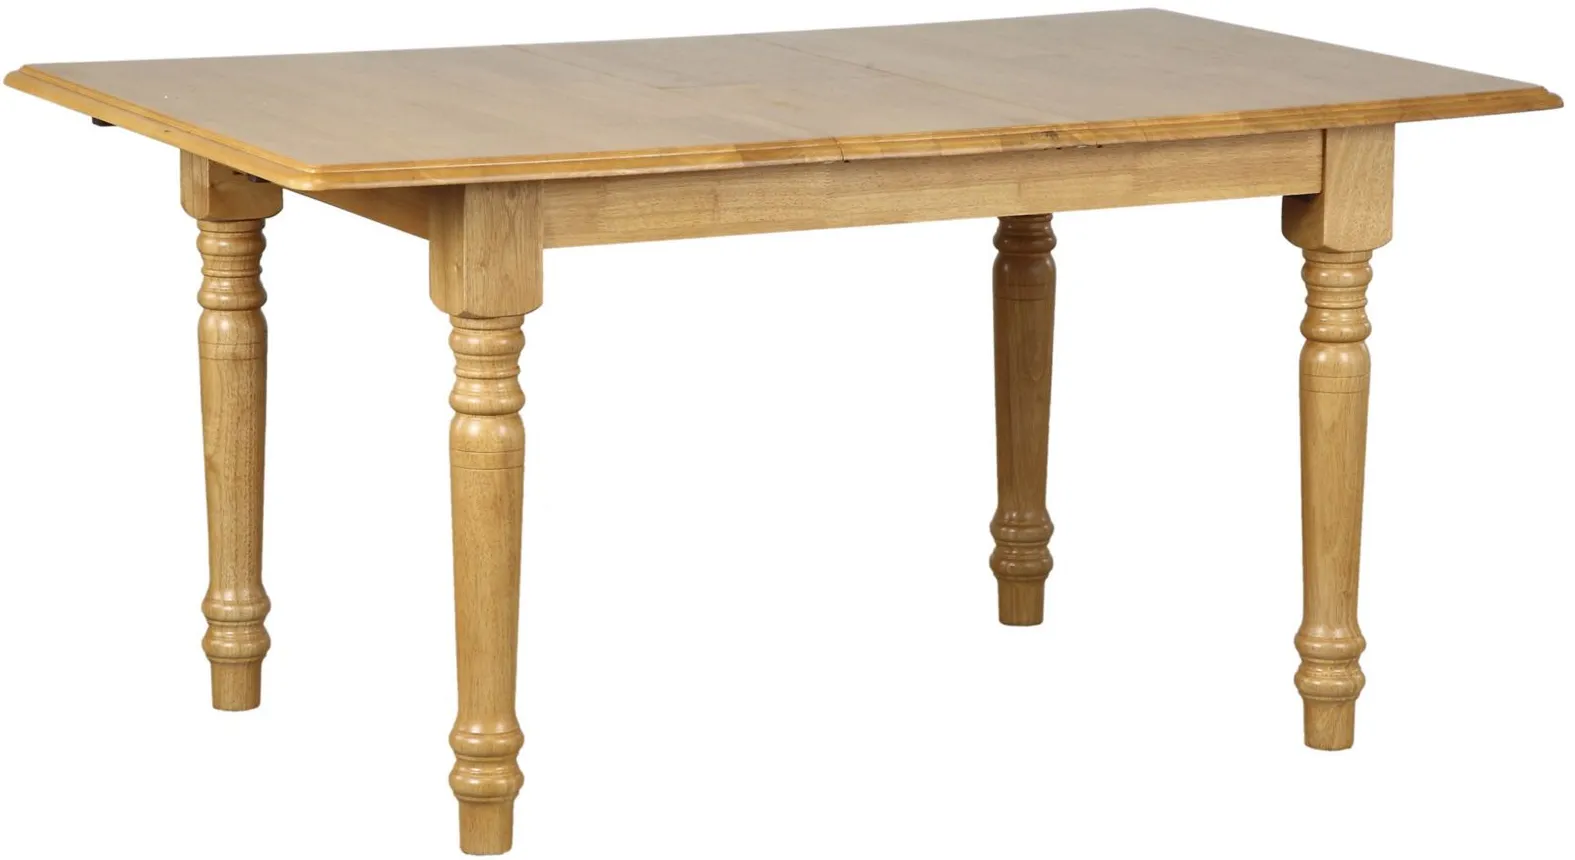 Oak Selections Butterfly Top Dining Table in Light oak finish by Sunset Trading